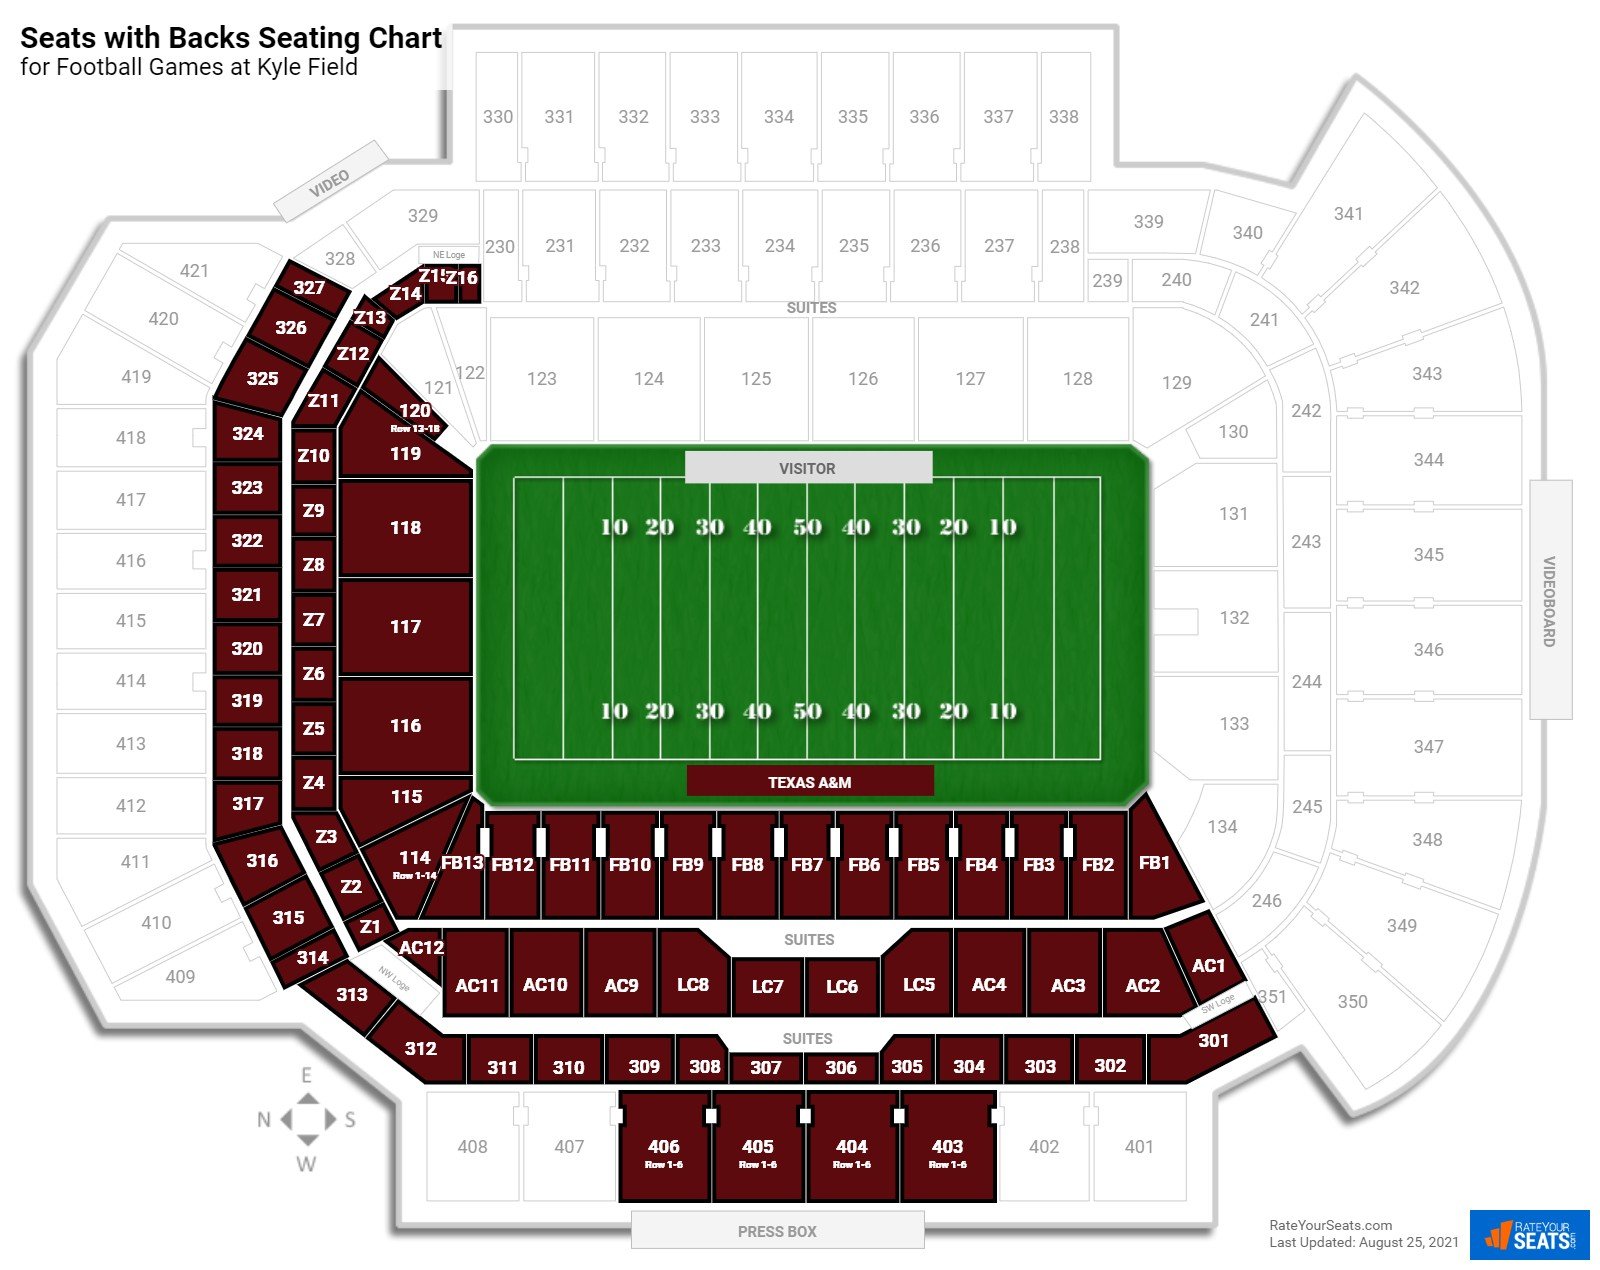 Football Seats with Backs Seating Chart at Kyle Field